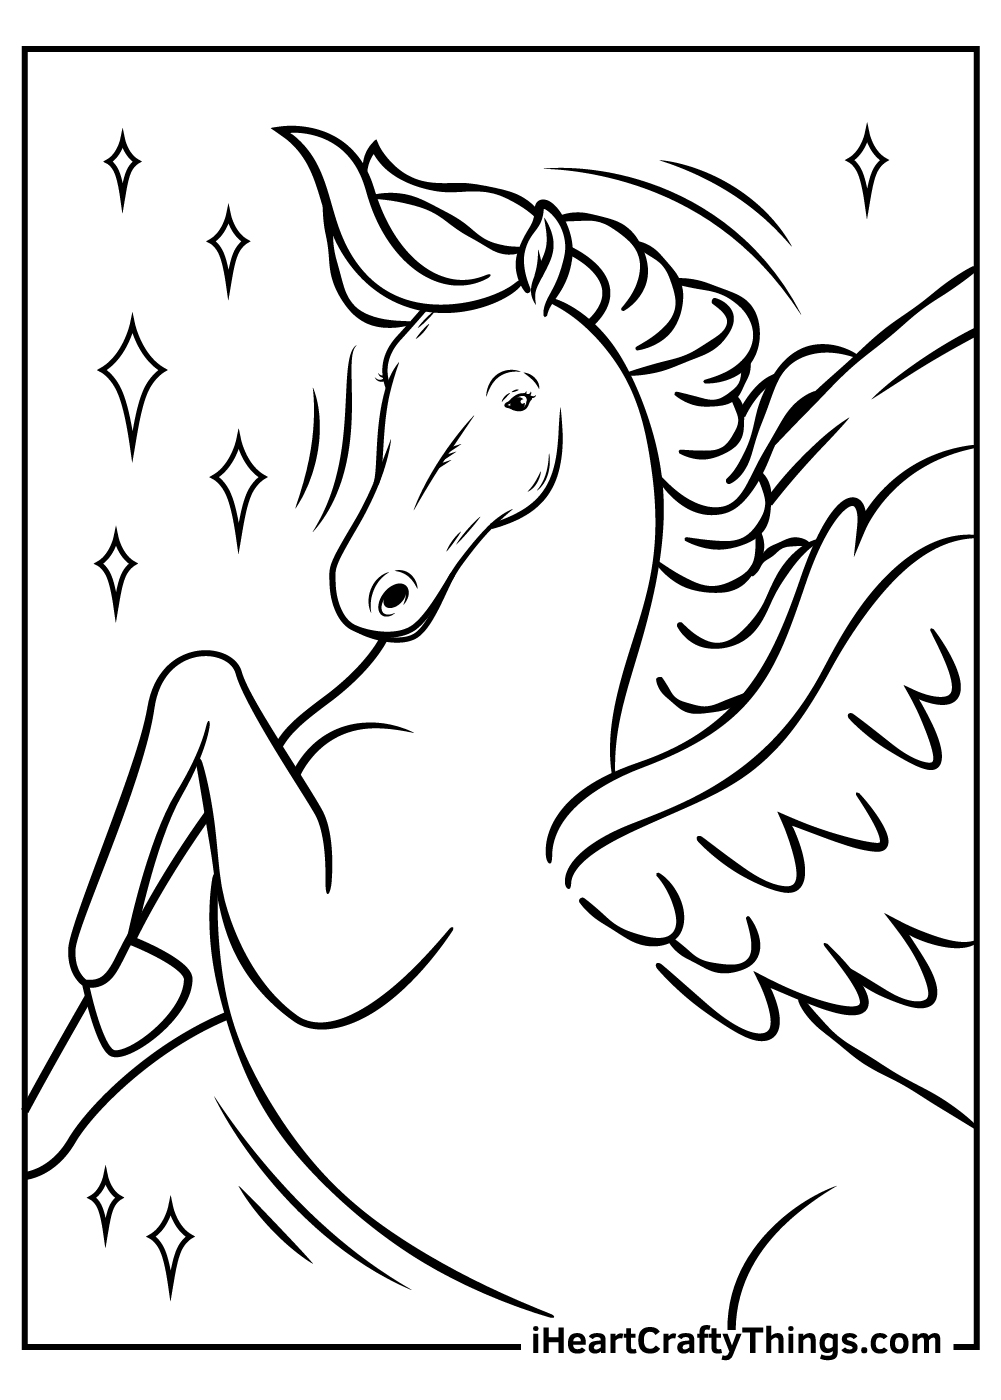 Printable fantasy and mythology coloring pages updated